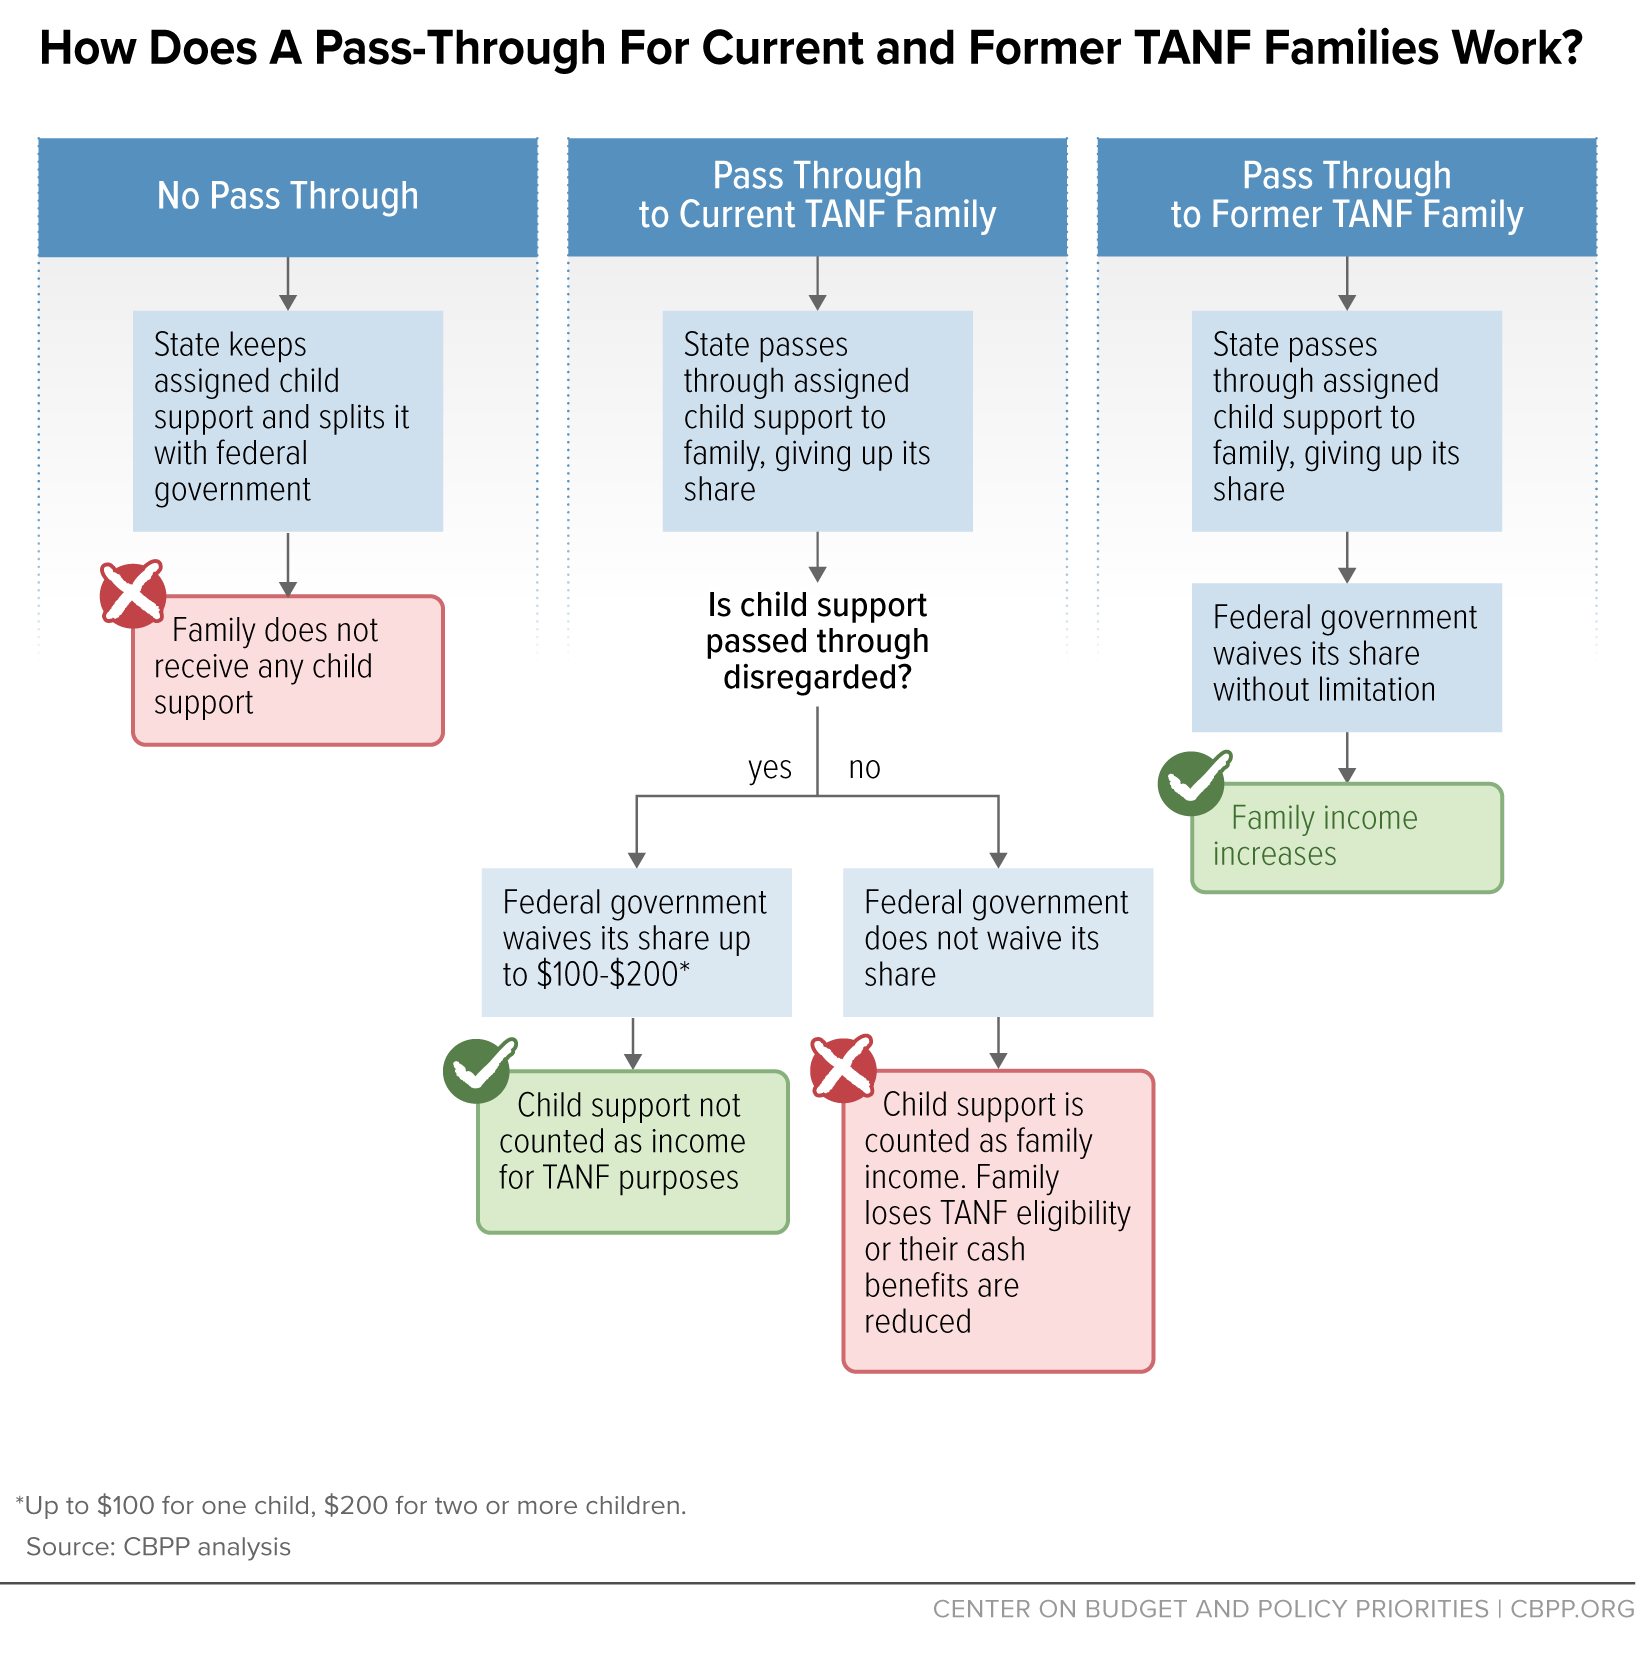 How Does A Pass-Through For Current and Former TANF Families Work?